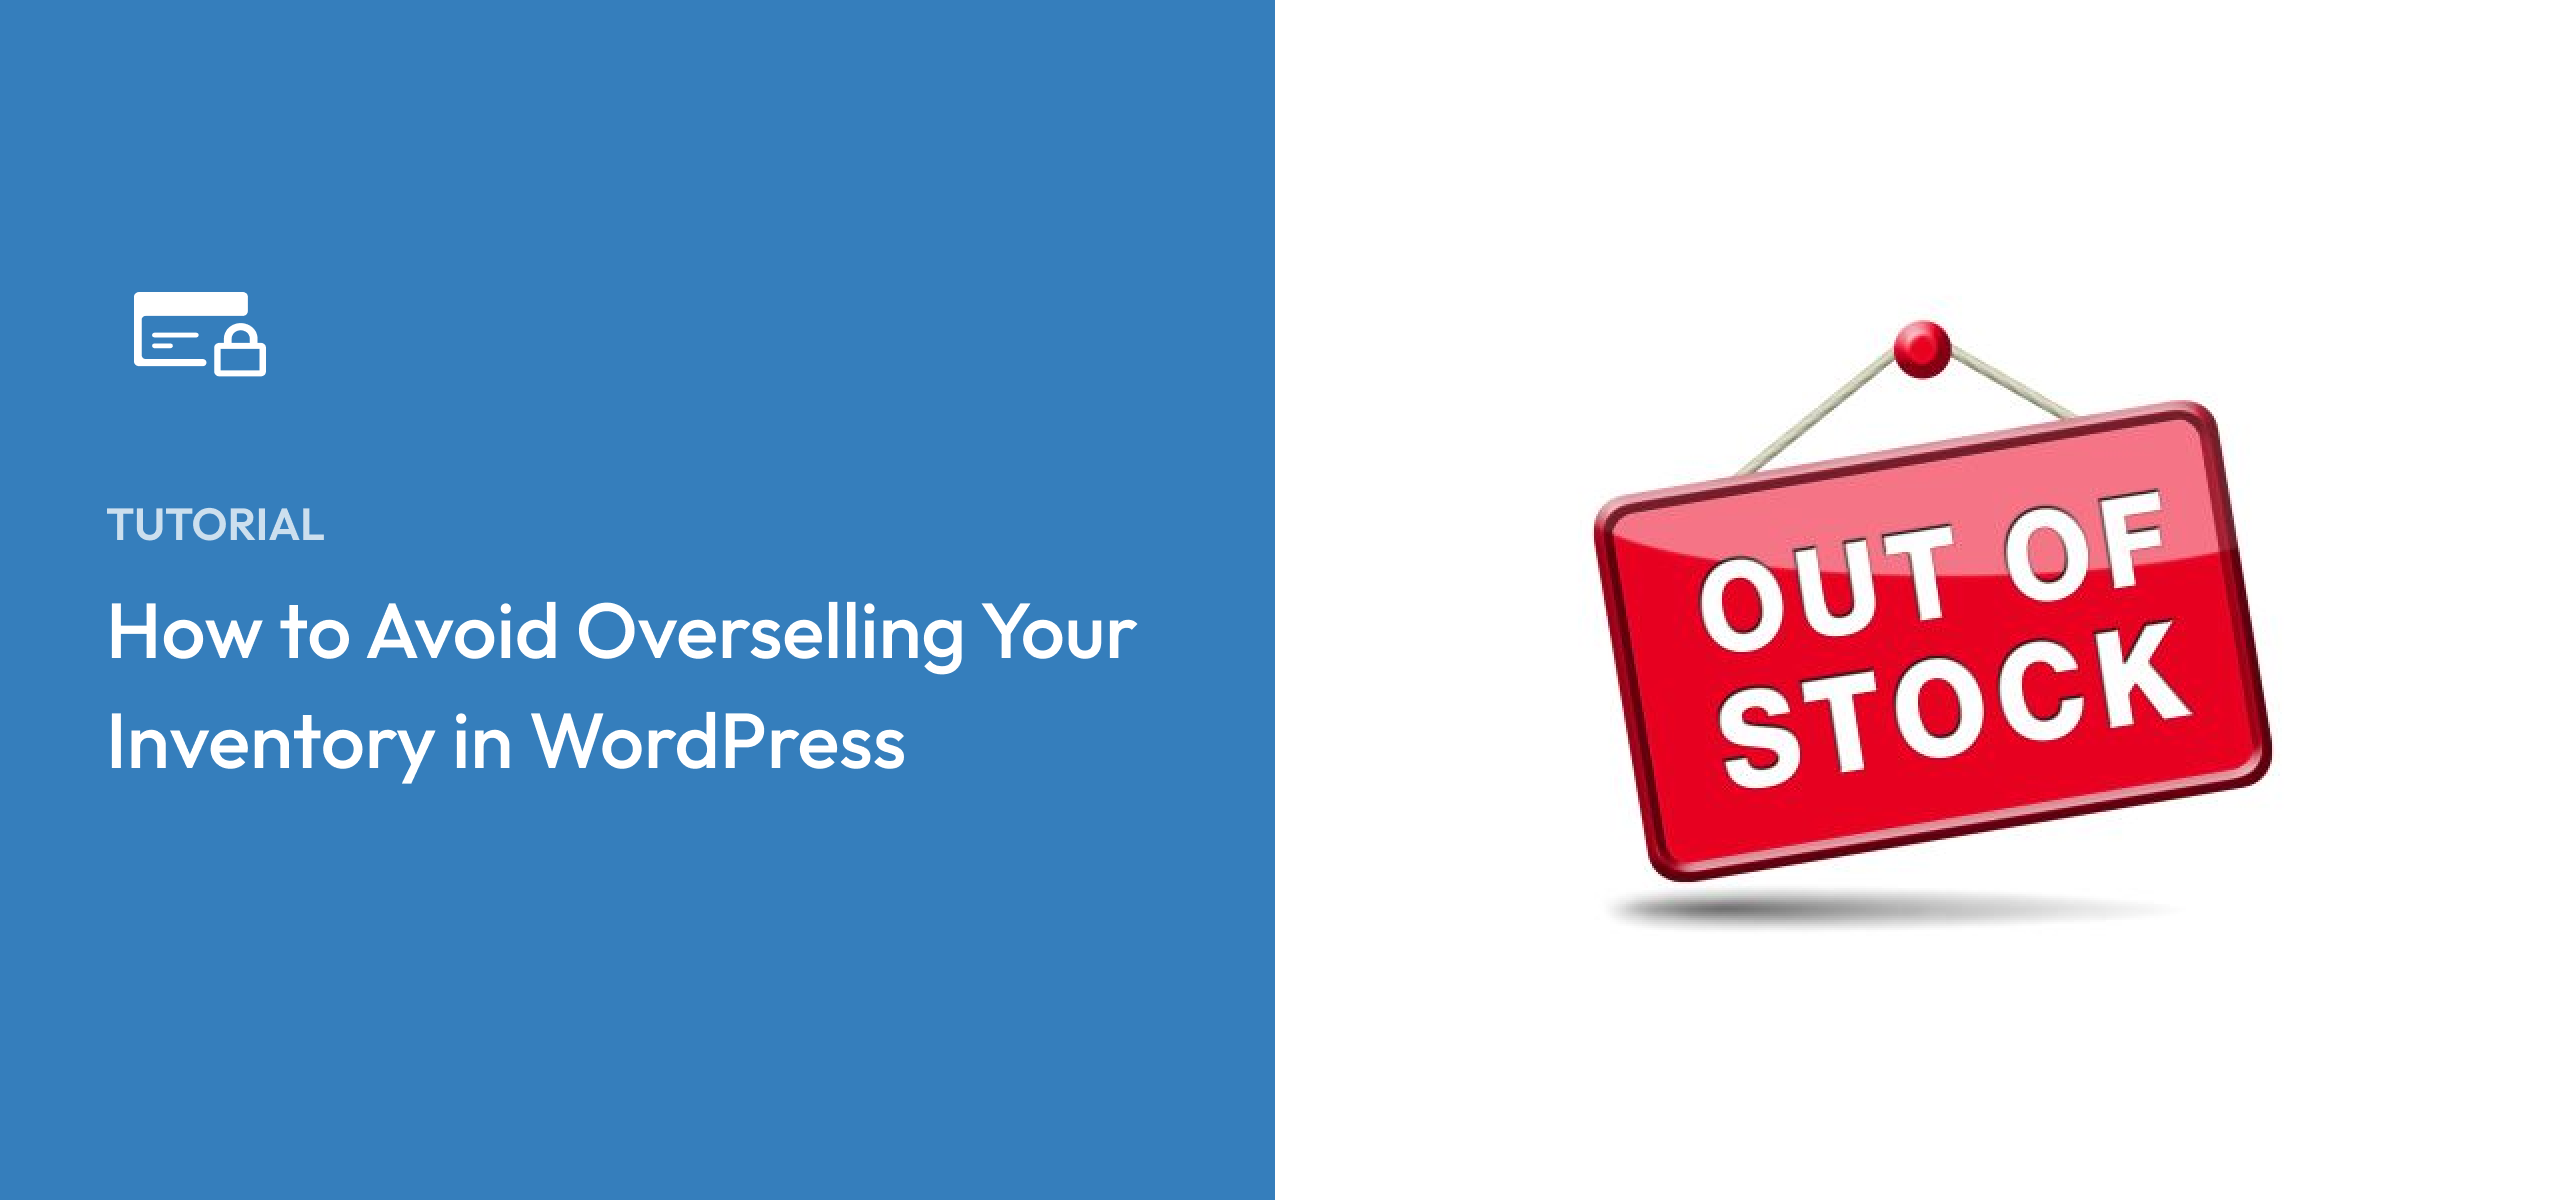 How to Avoid Overselling Your Inventory in WordPress